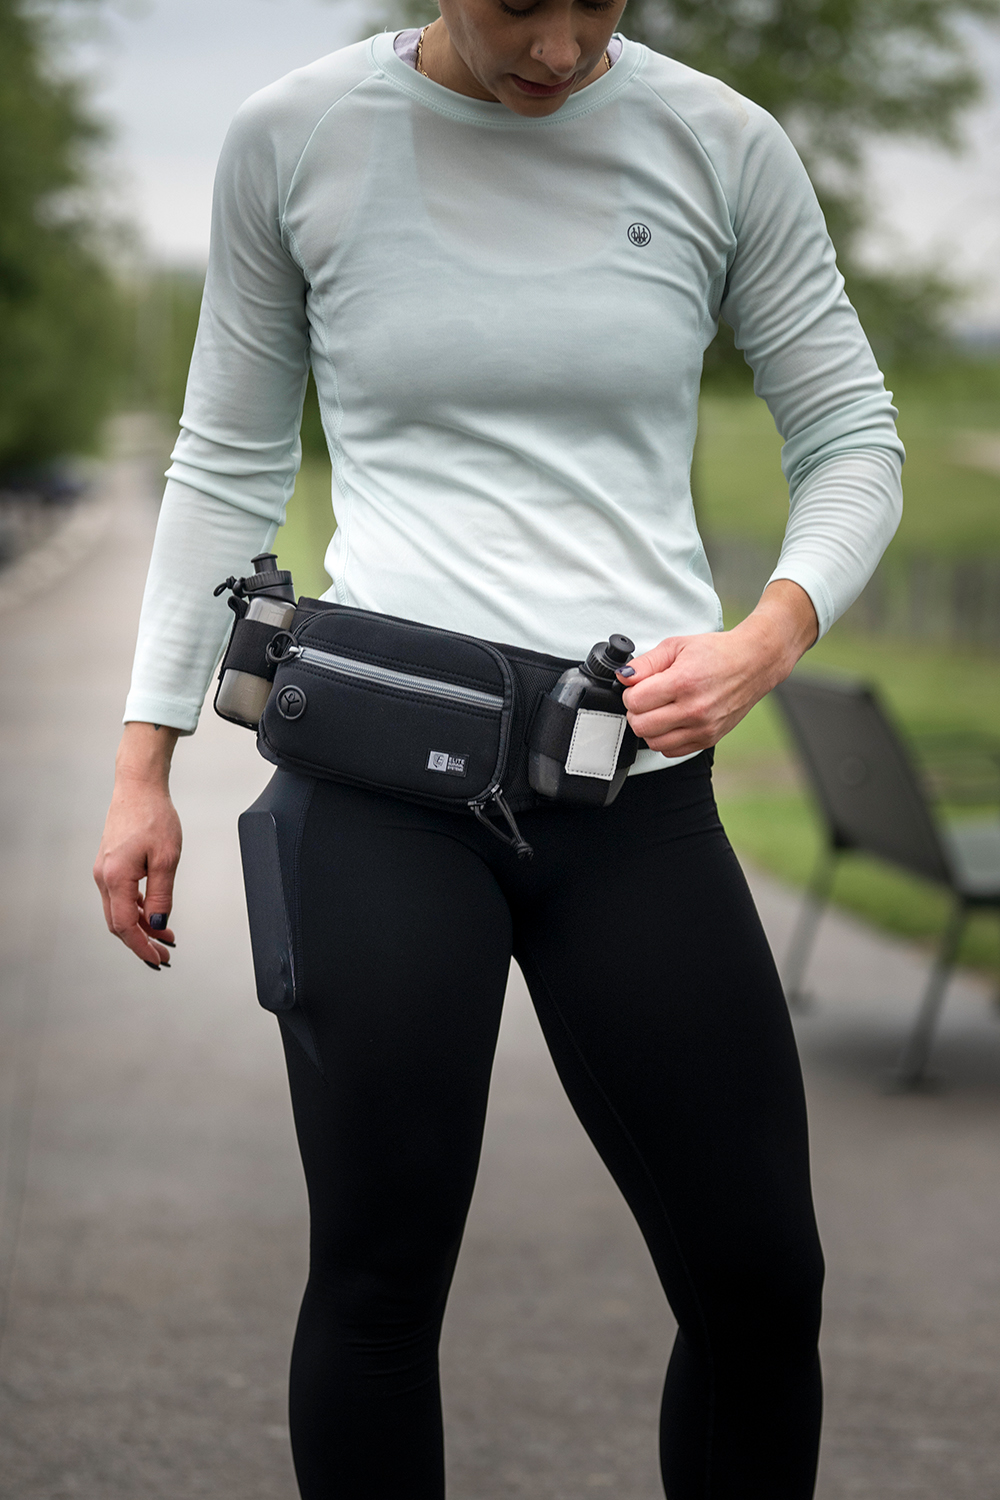 Marathon Gun Pack offers runners a secure concealed carry solution.